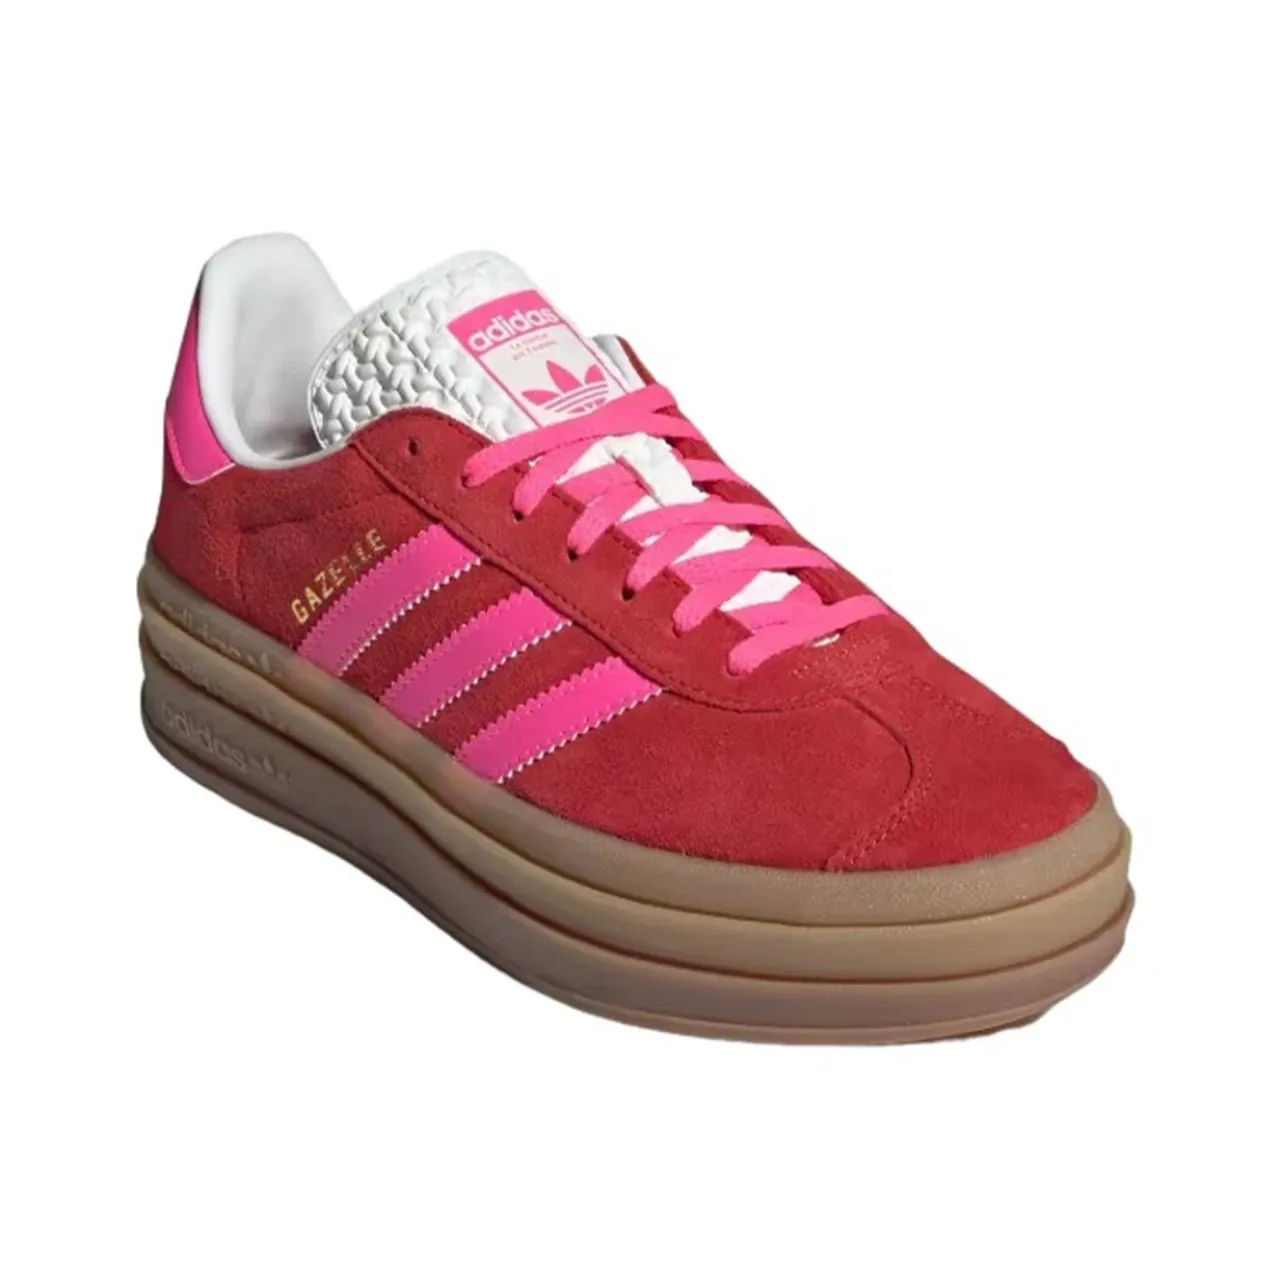 Adidas , Ih7496 Sneakers ,Multicolor female, Sizes: